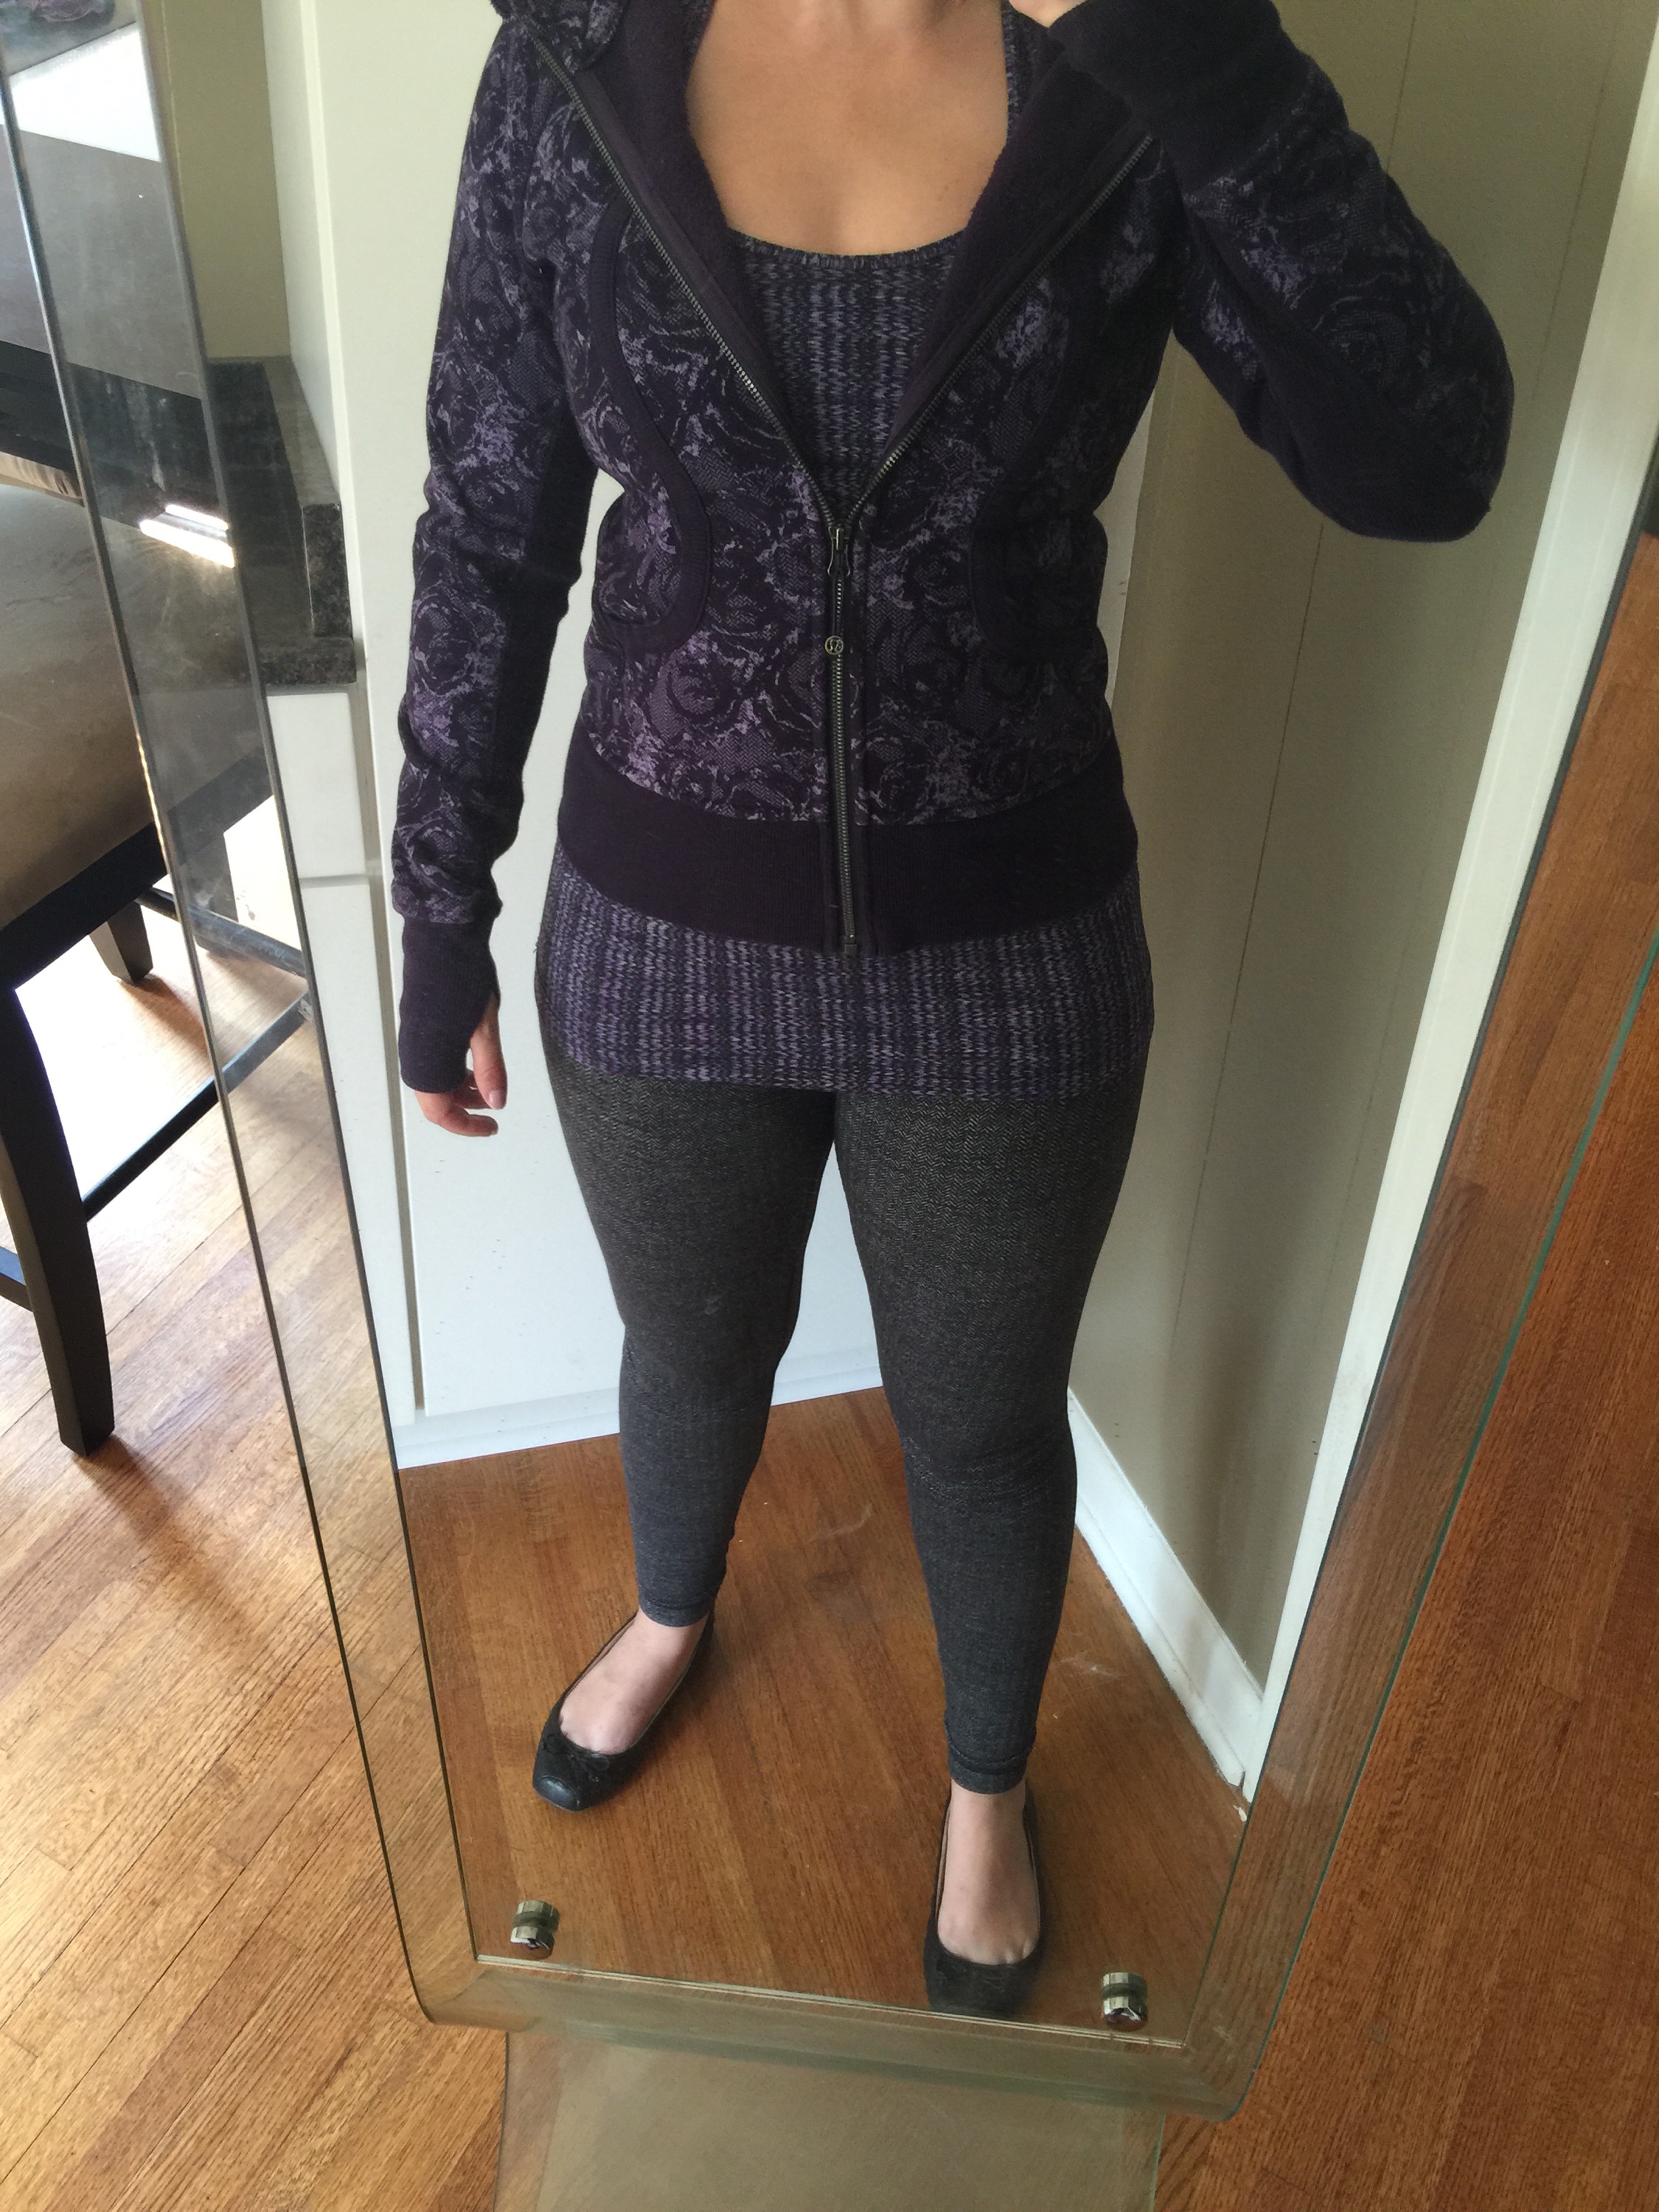 Lululemon Outfit of the Day - 55 - lululemon expert